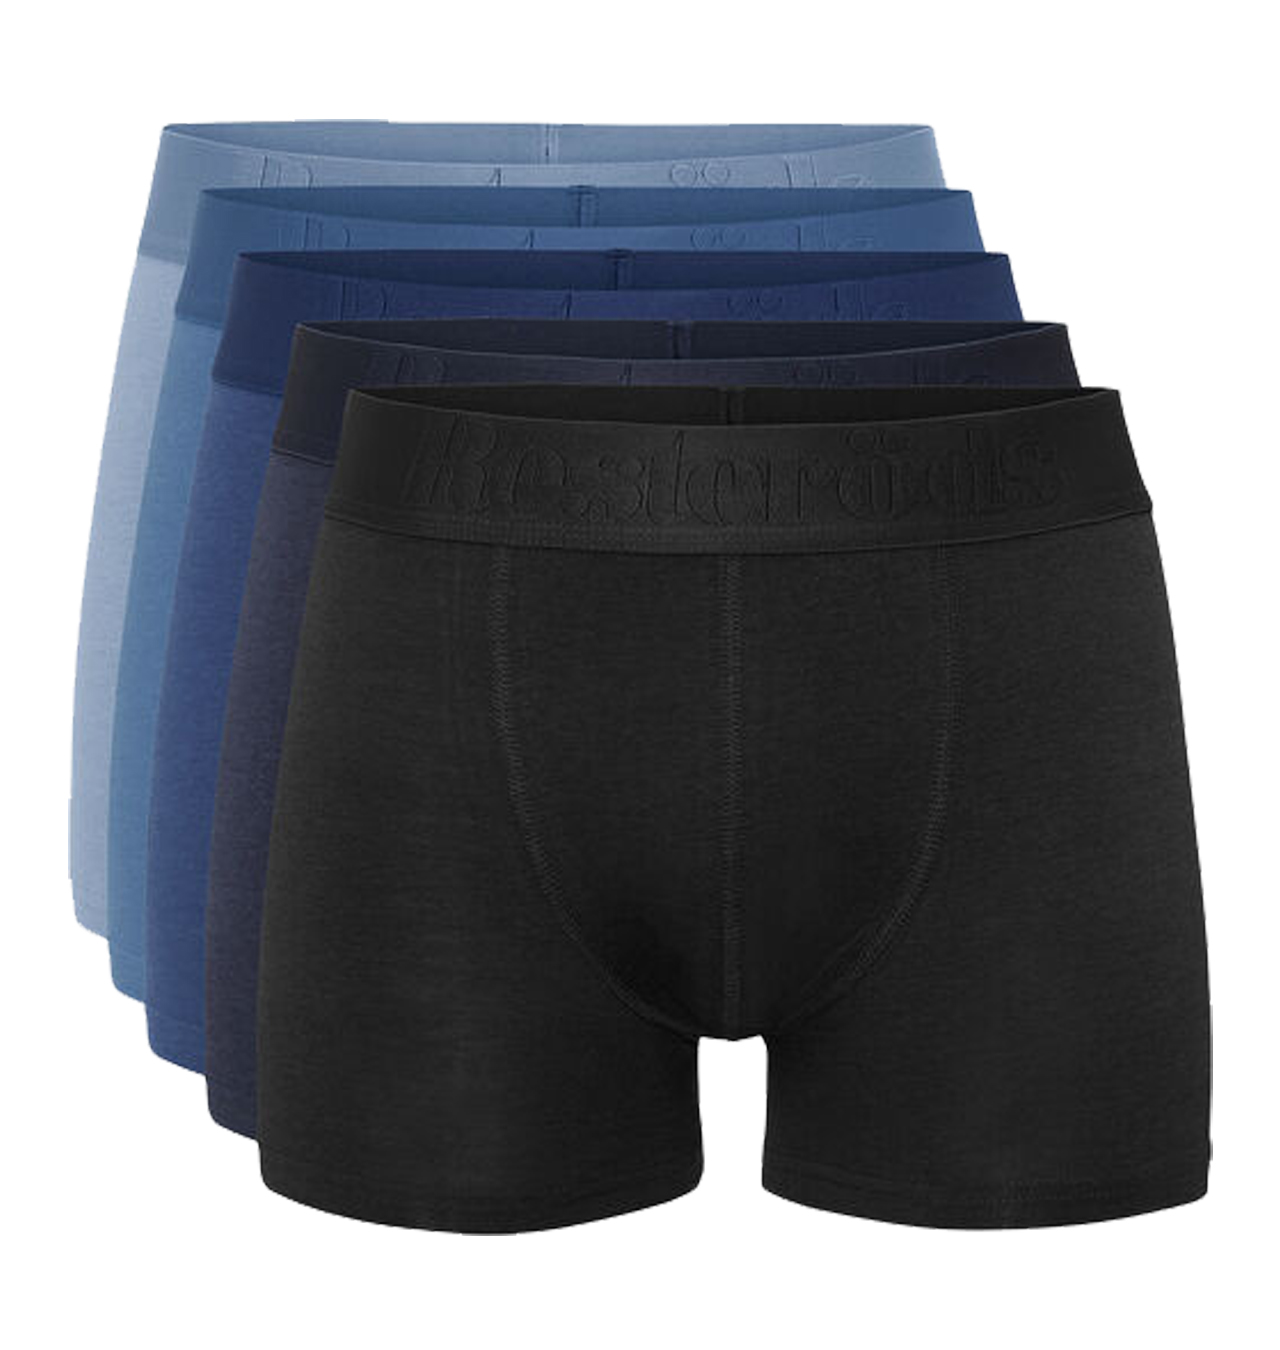 Resteröds - Boxer Bamboo 5-pack (Multi 17) - Mixed Colors